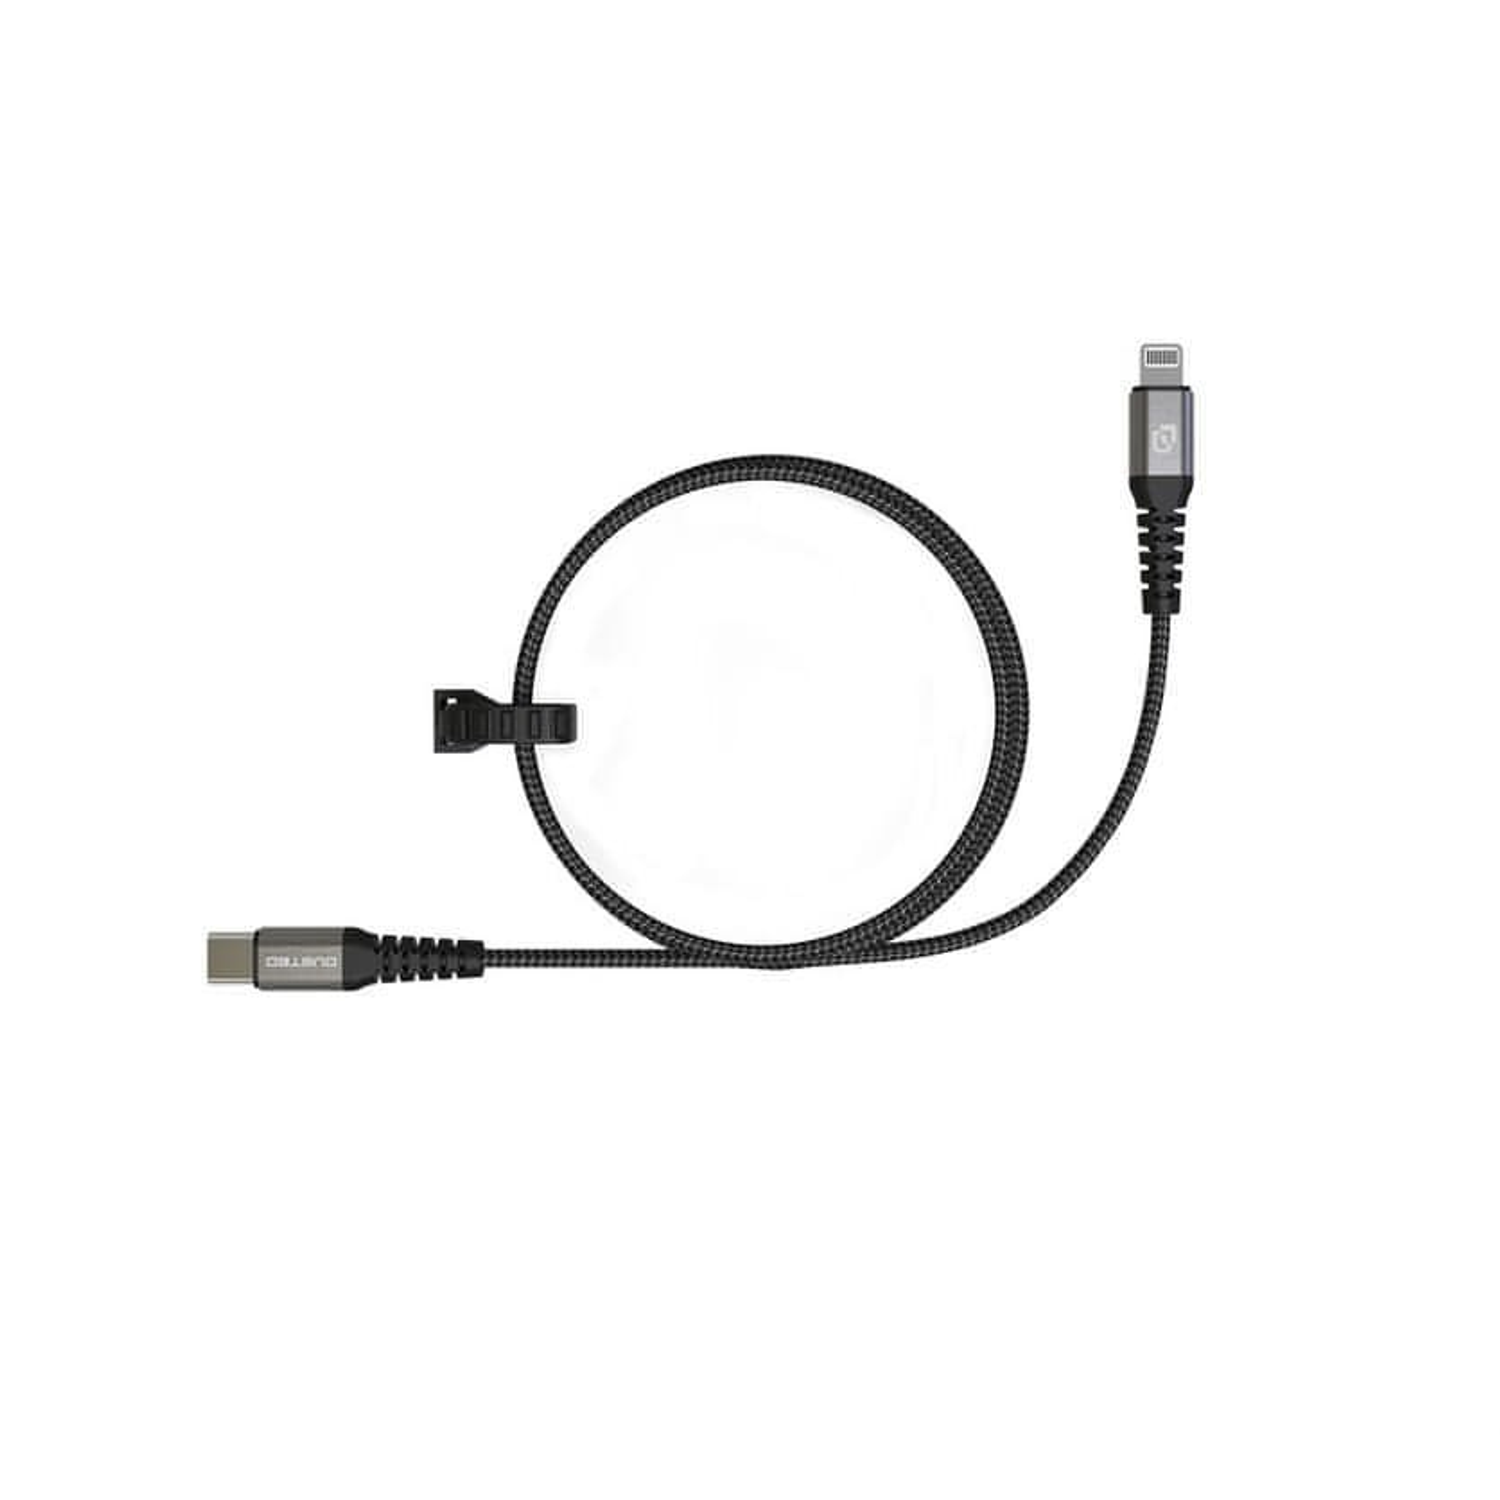 Cable Lightning a USB-C Dusted Rugged de 1,2 m